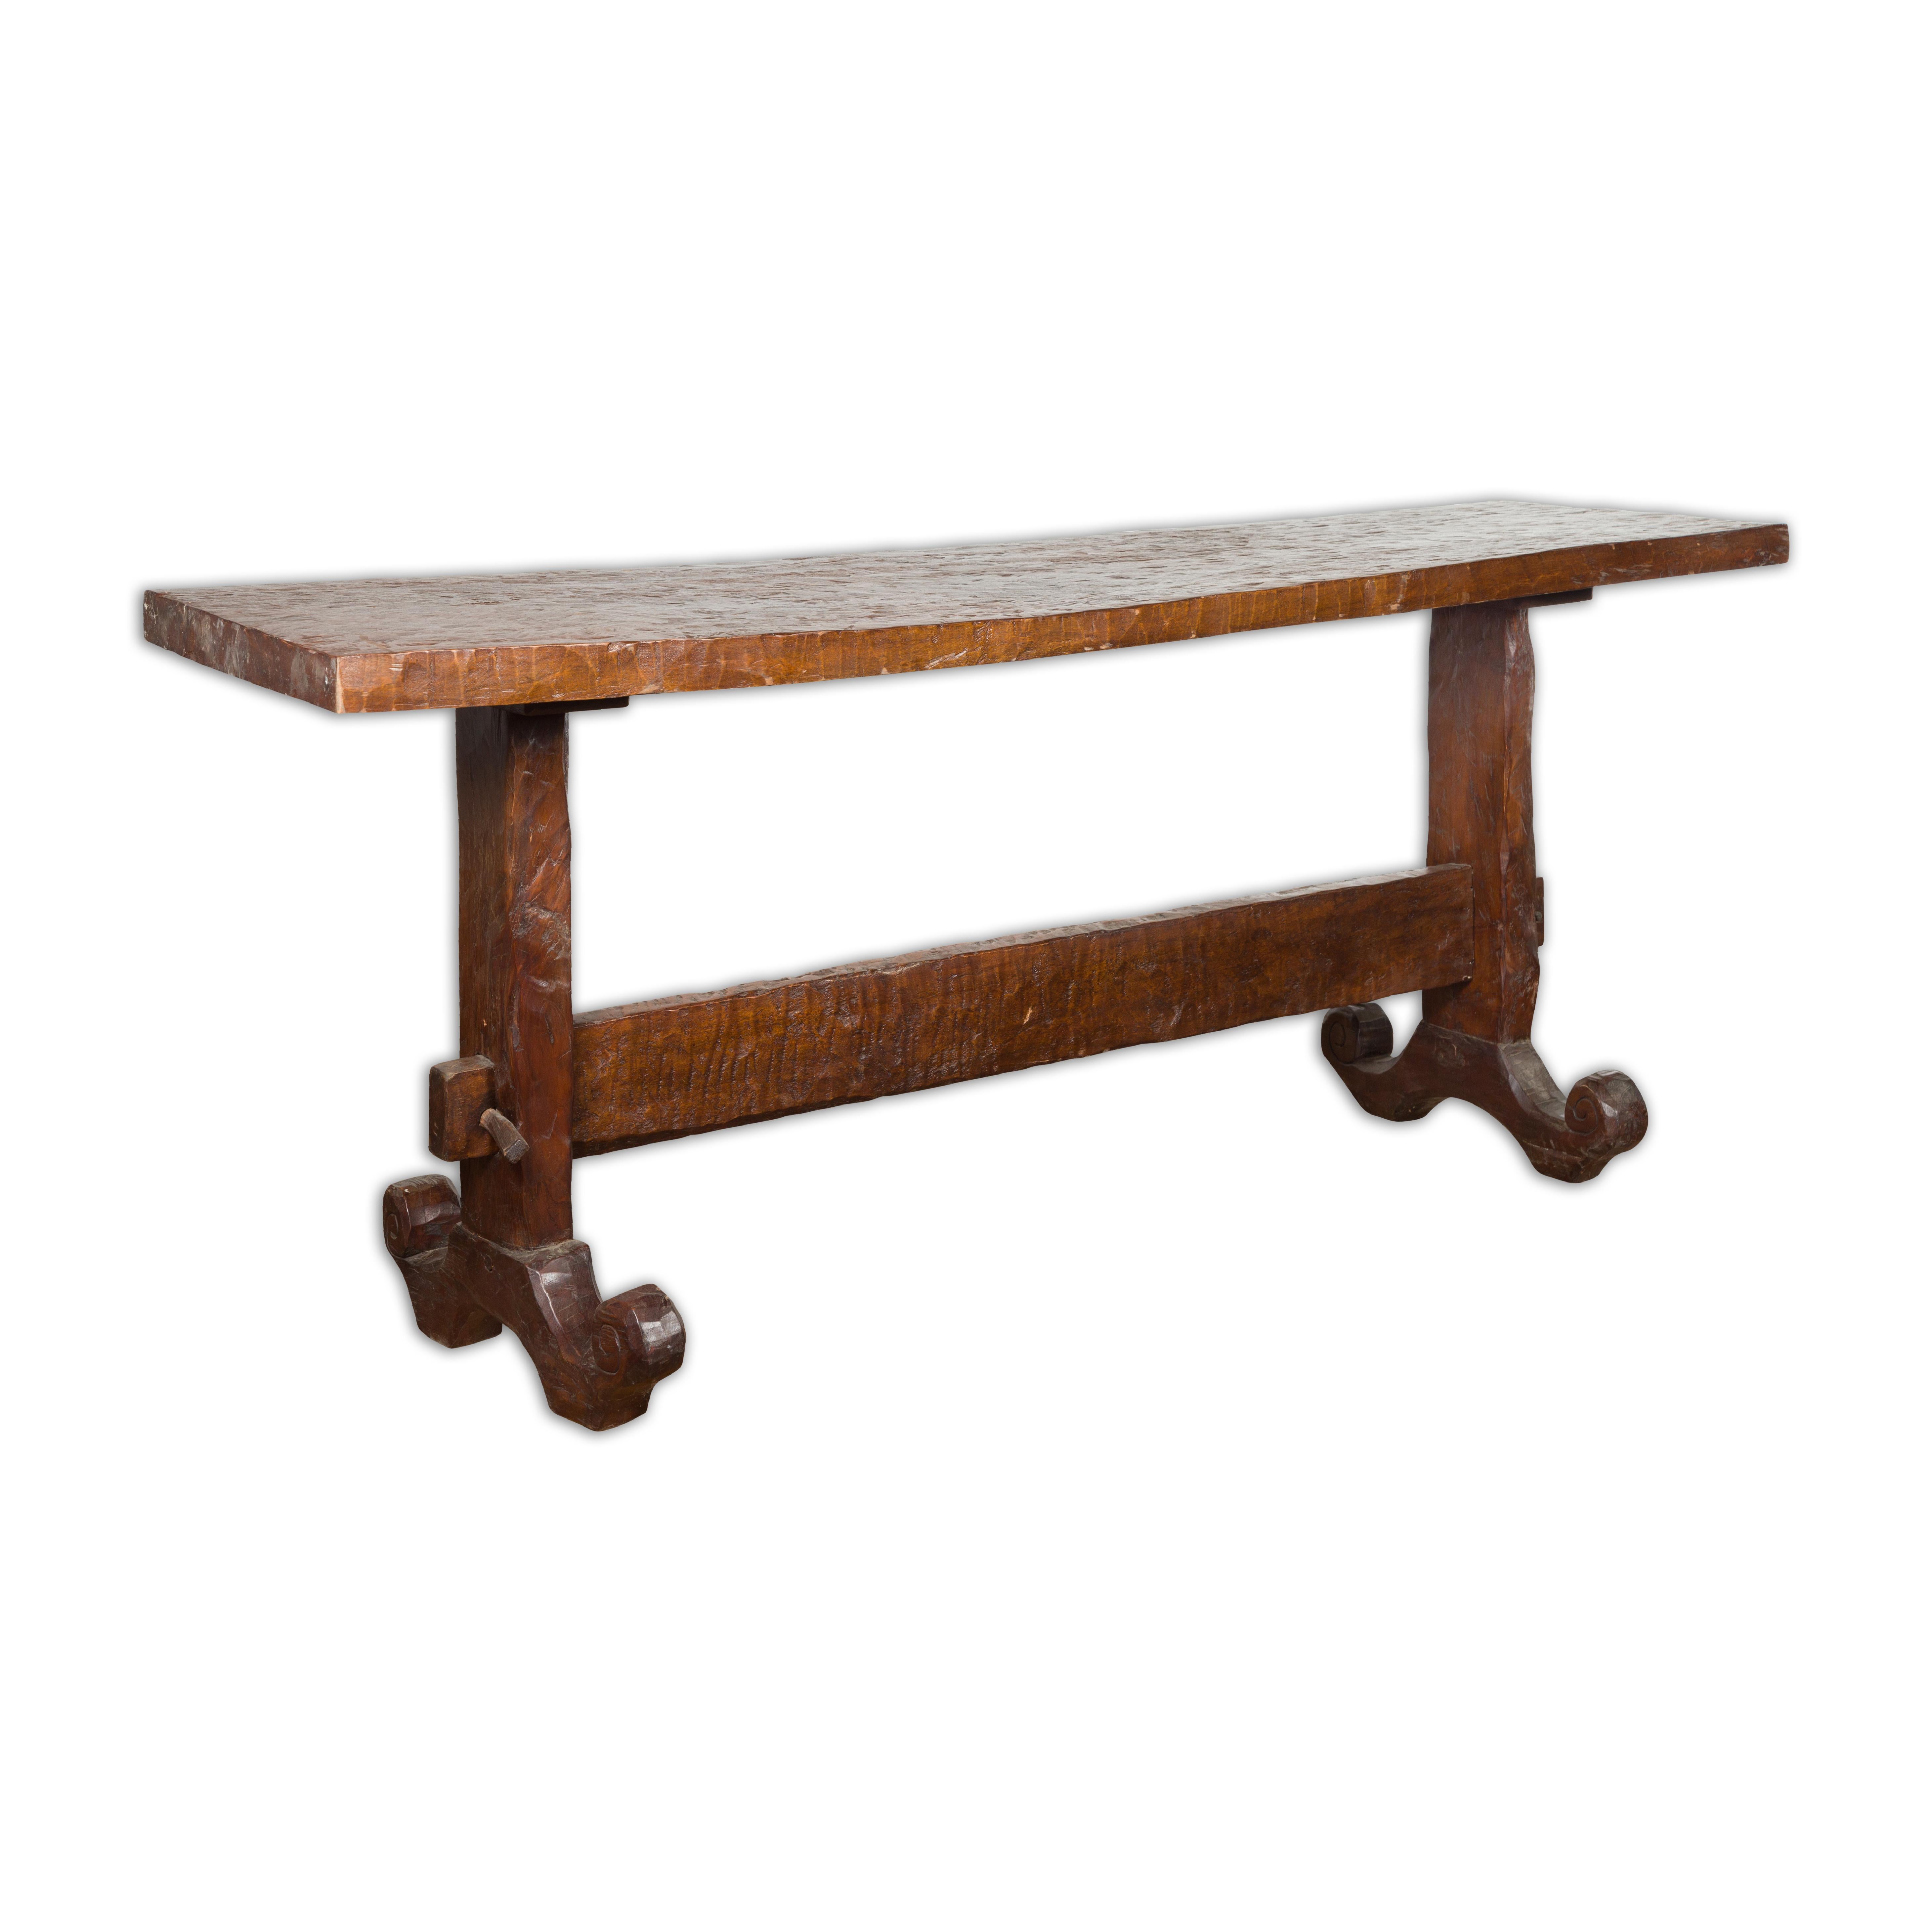 19th Century Javanese Wood Console Table with Trestle Base and Rustic Character 14